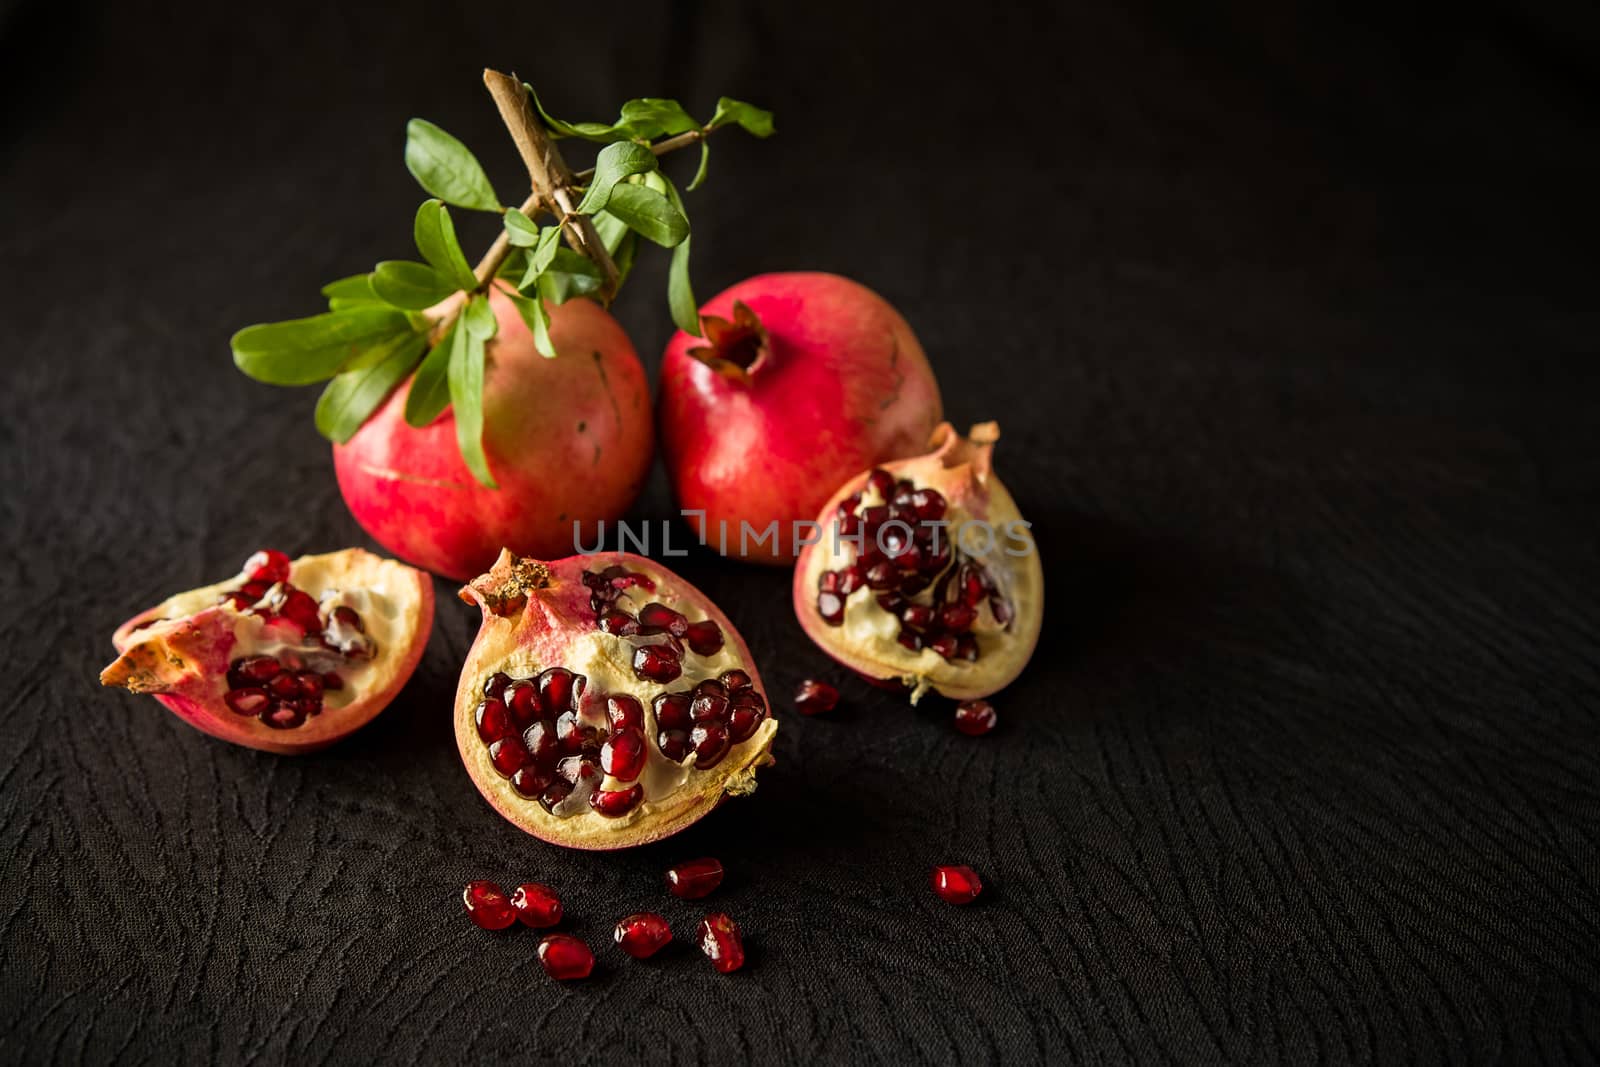 Pomegranate fruits and seeds over a textured black background